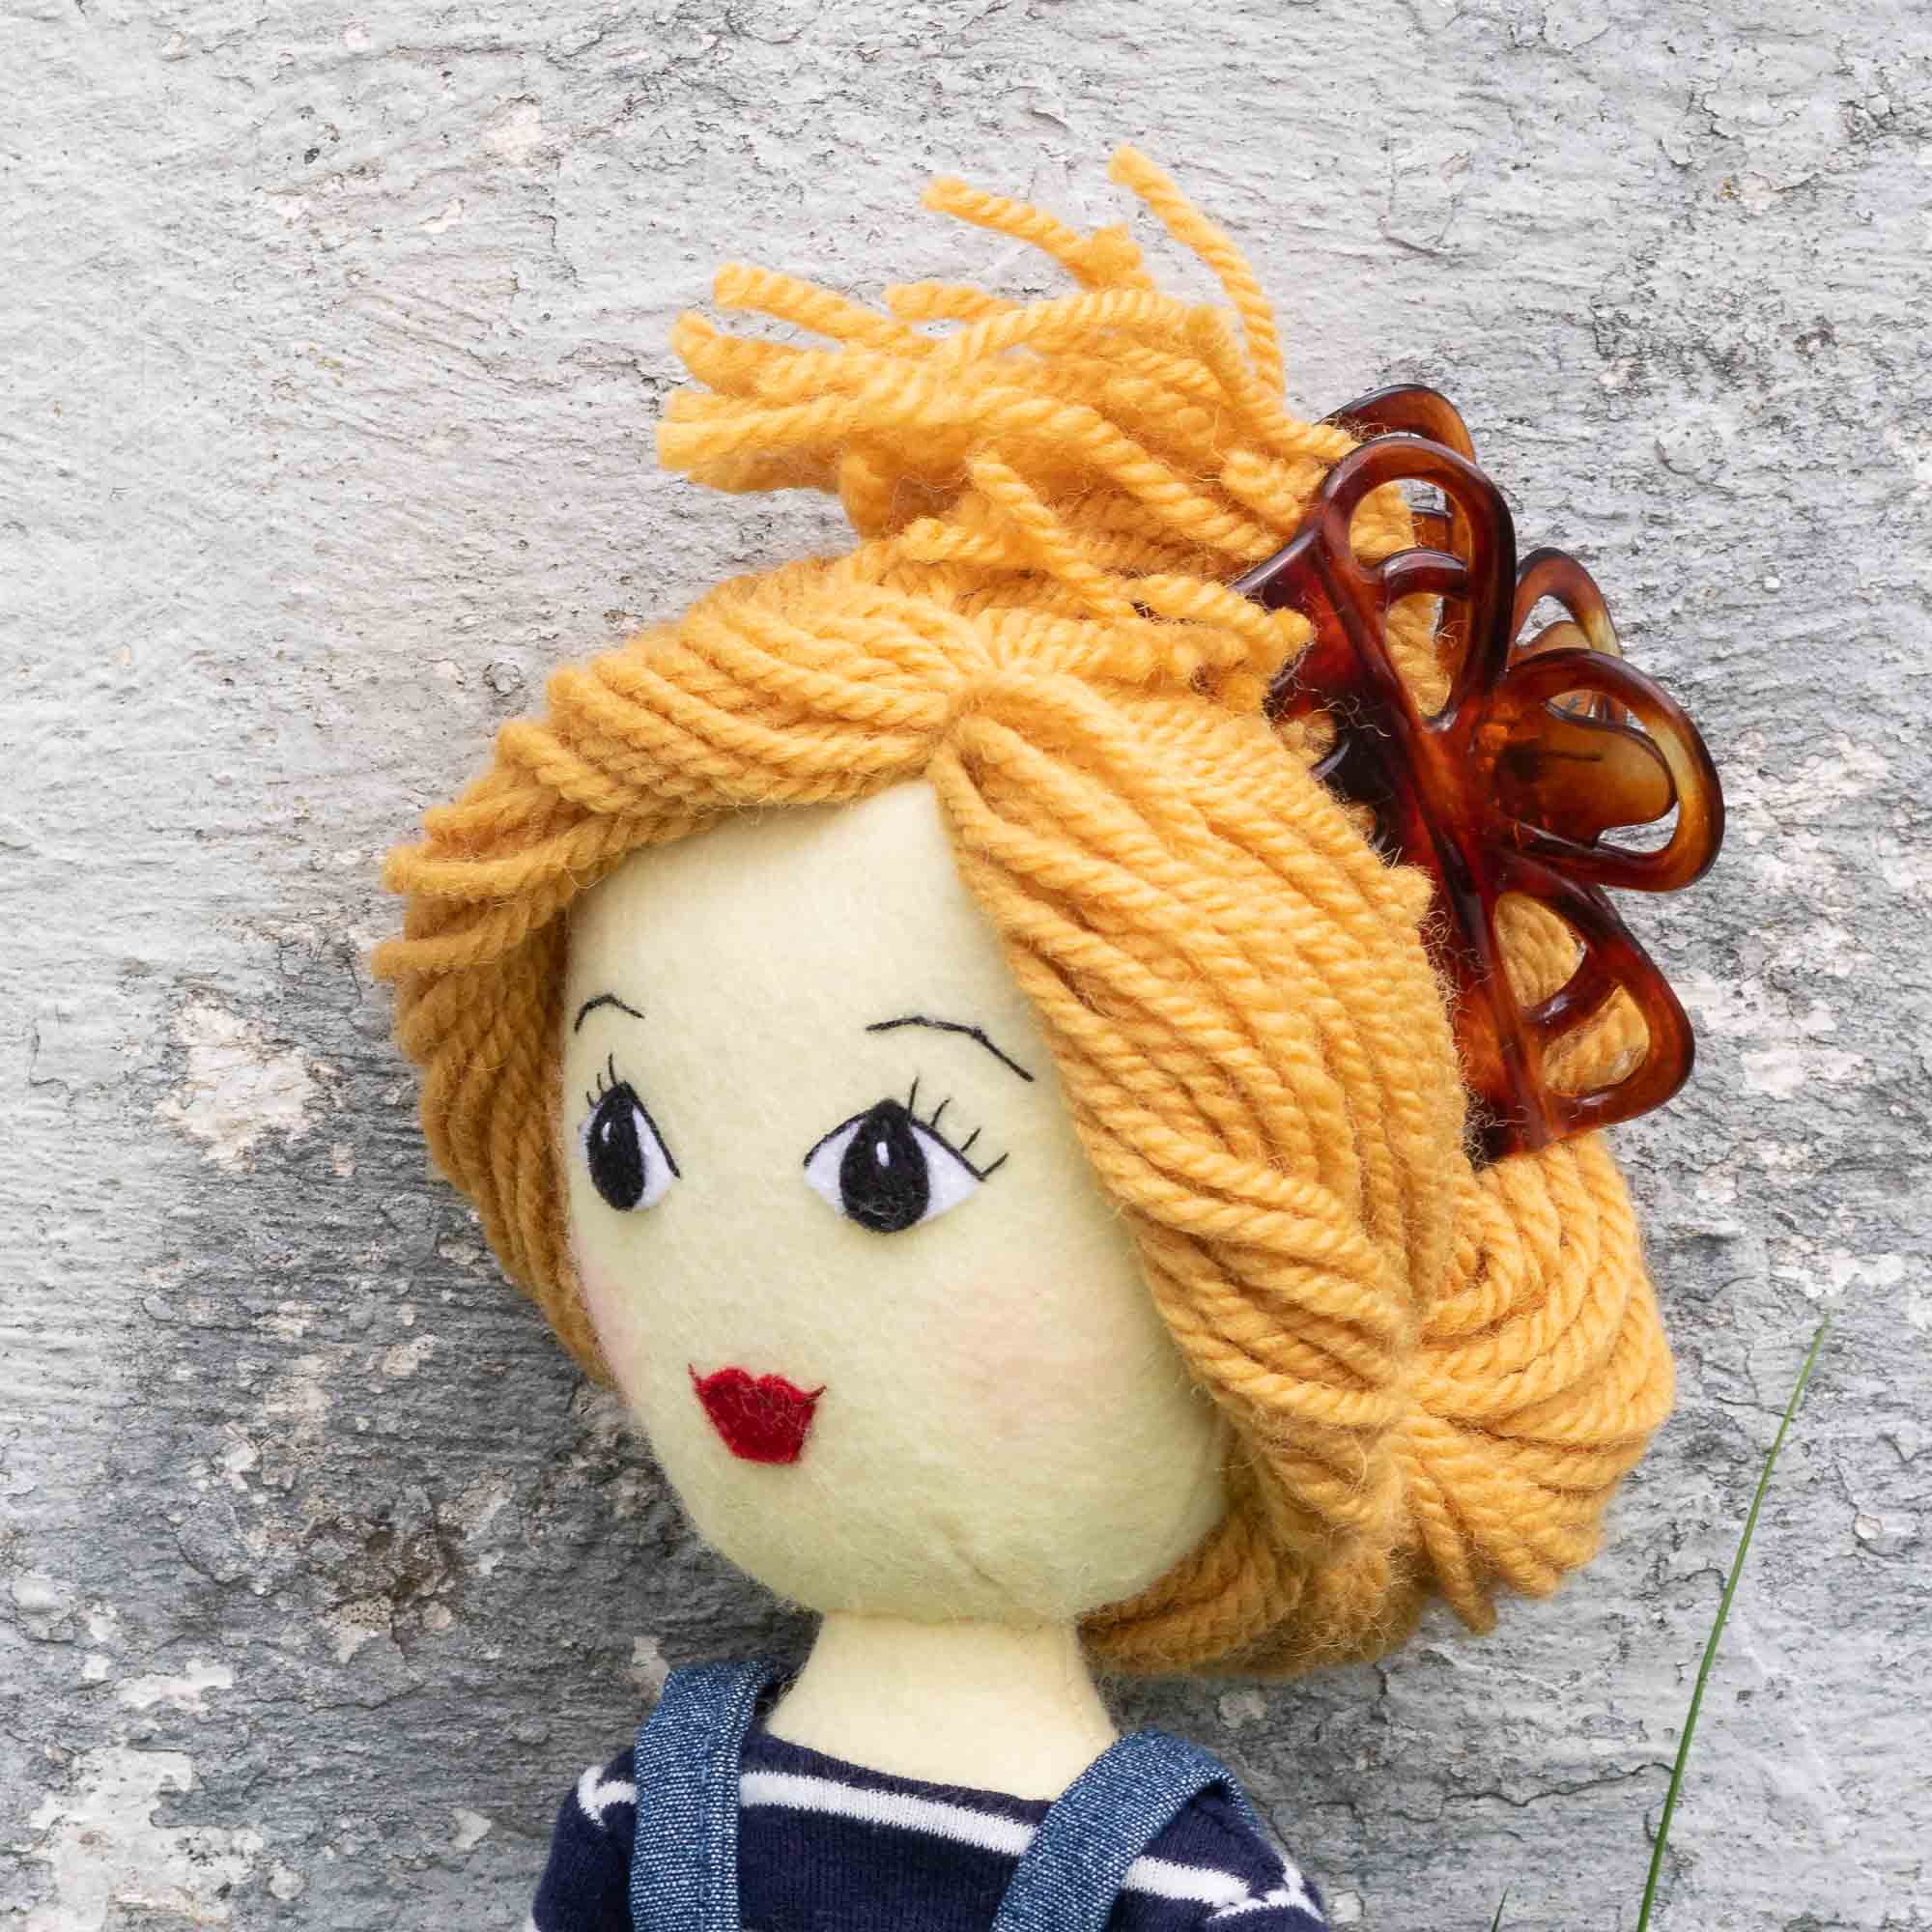 How to Make Ragdoll Hair With Yarn, Rags, or Mohair - FeltMagnet